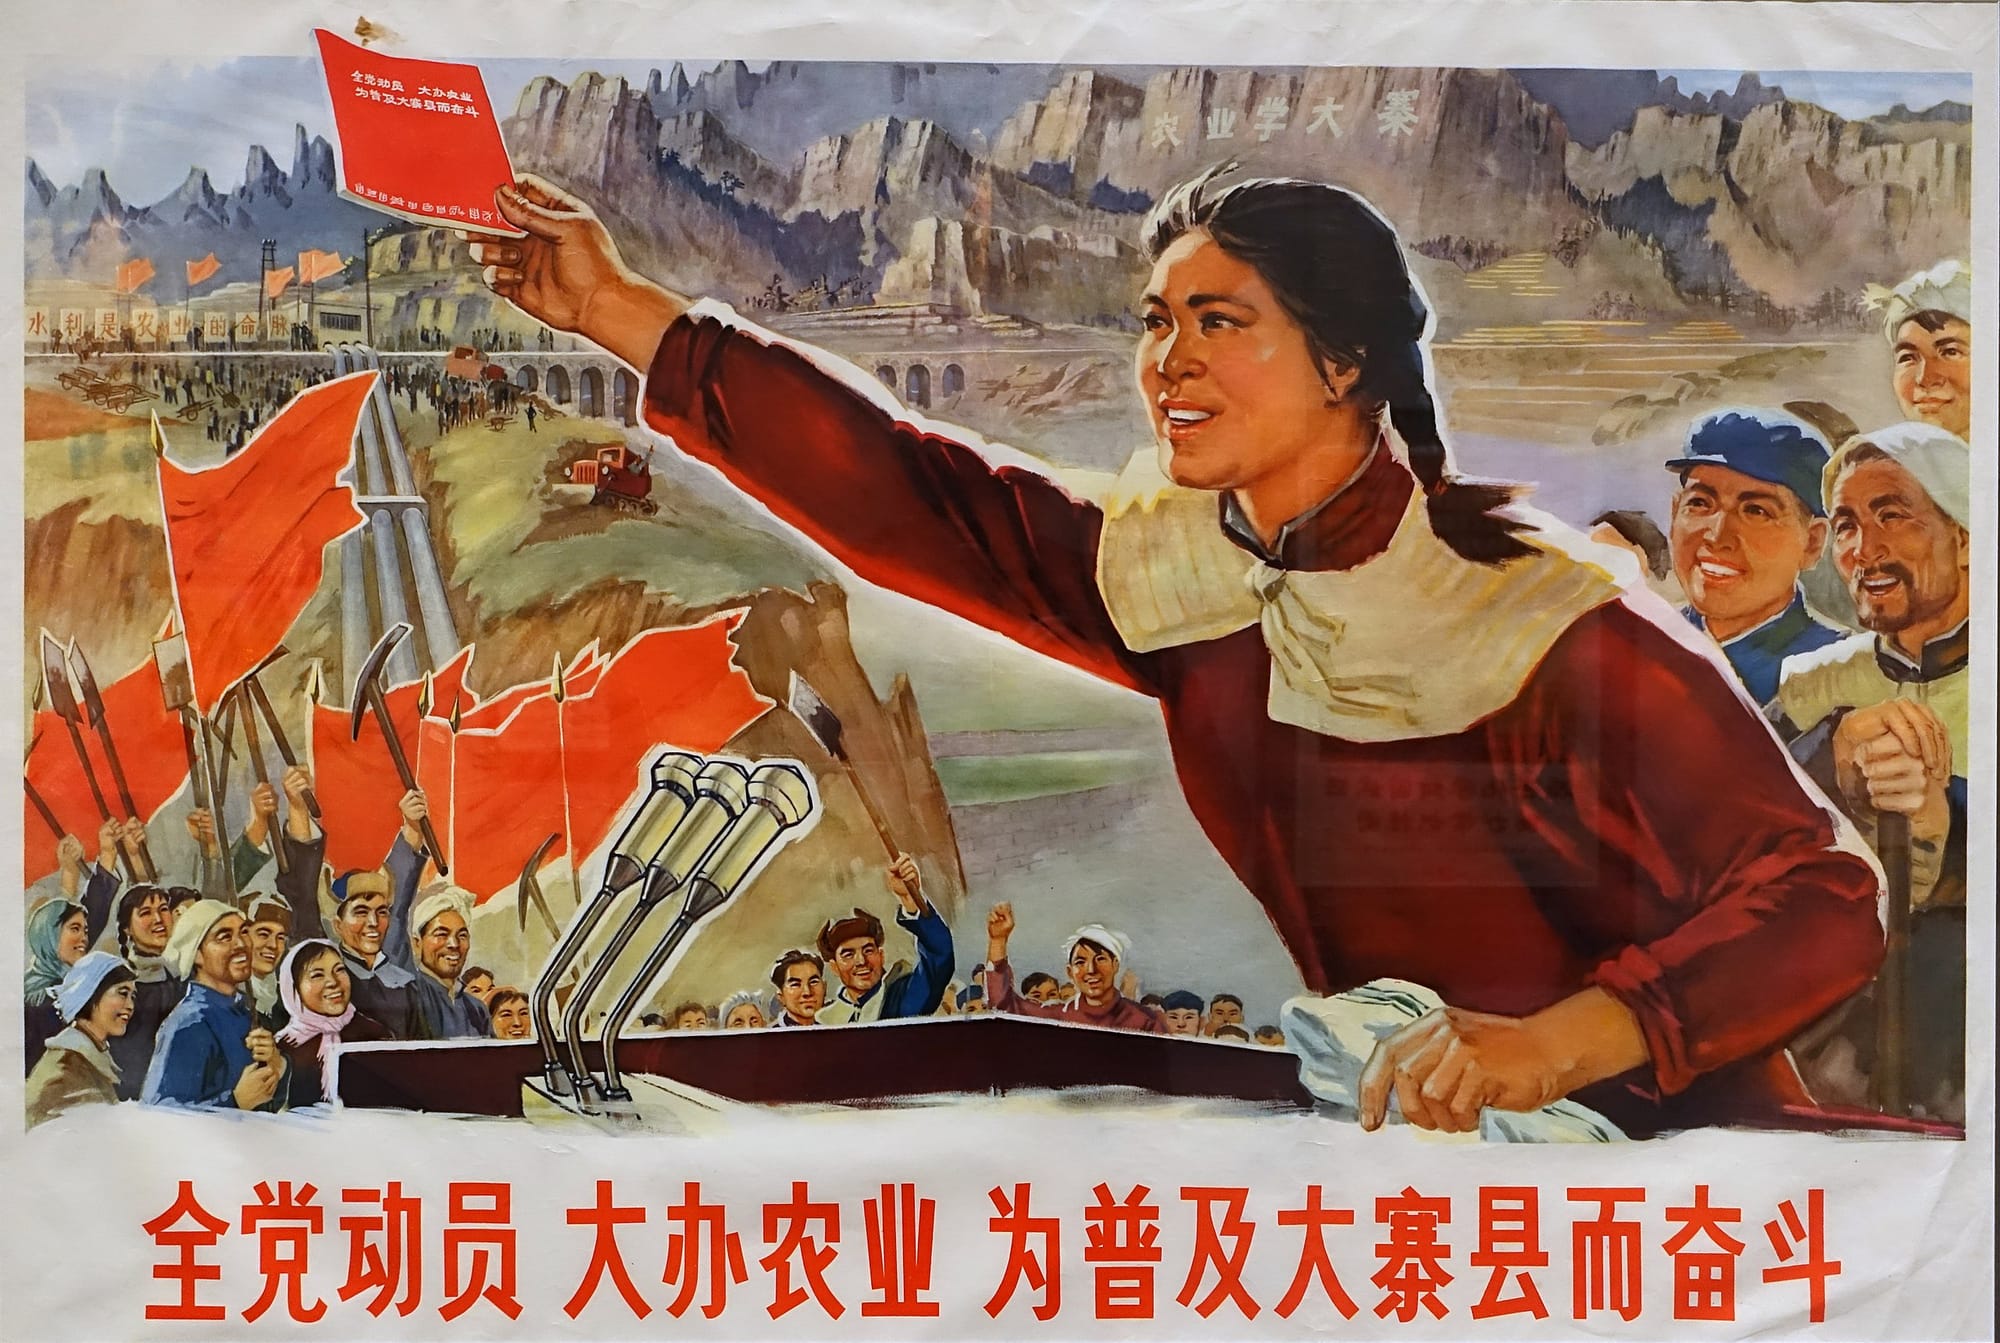 Vintage CCP poster features lady farmer giving a speech to wild acclaim, and the caption, 'The Communist Party Mobilizes All Its Members to Practice Agriculture in Order to Fight for the Popularization of Dazhai County, China'